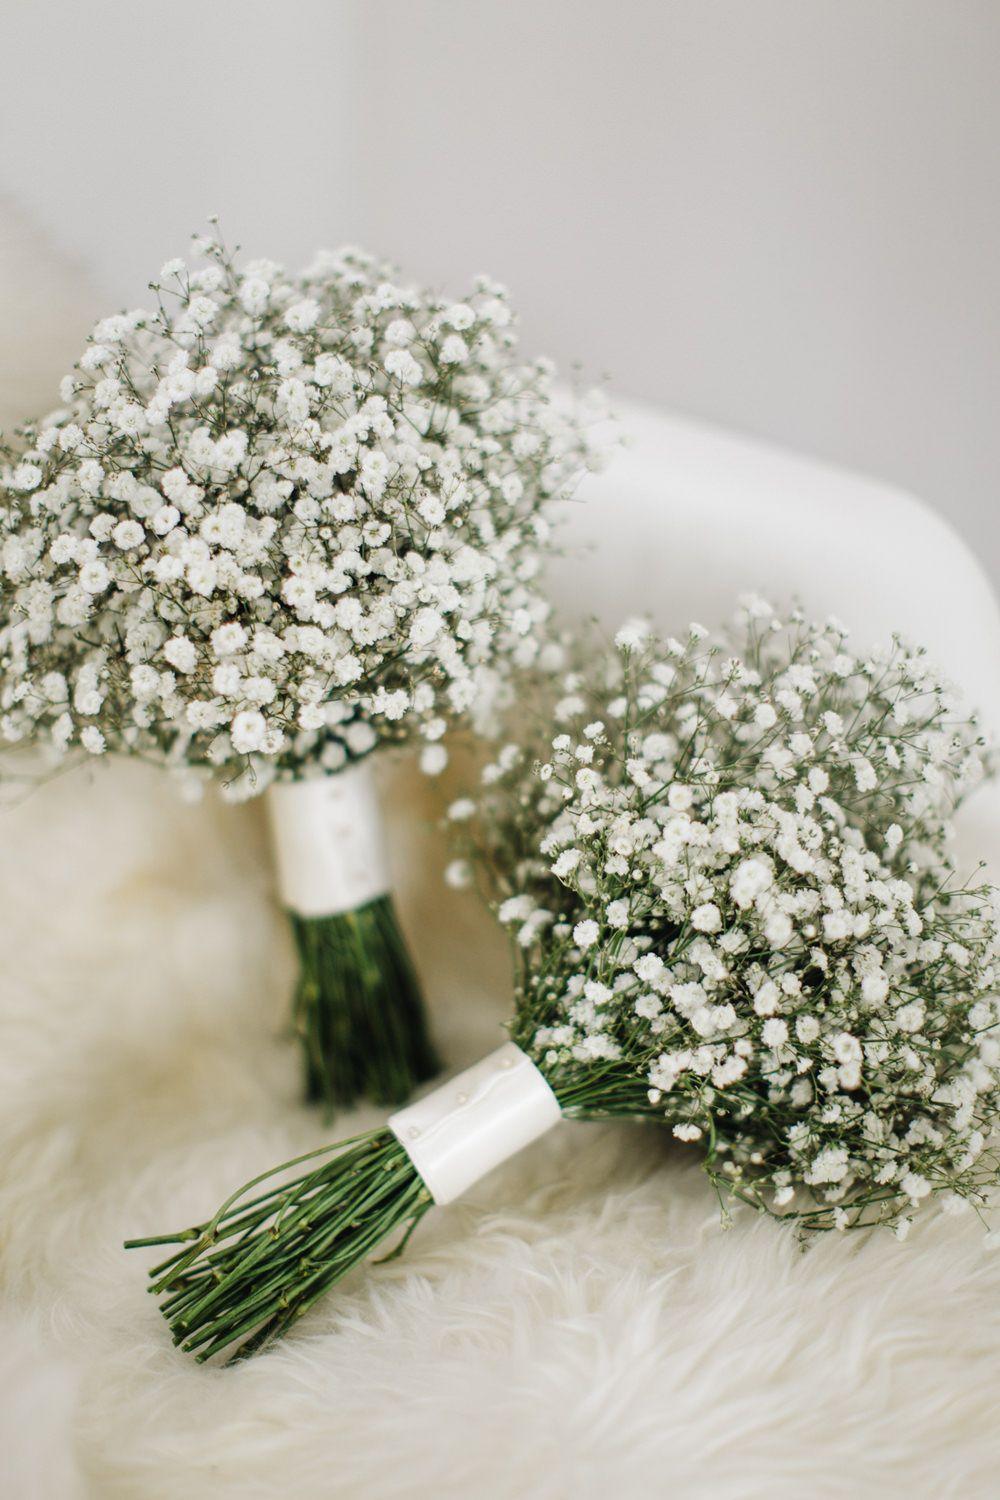 12pcs Artificial Baby's Breath Decorations, White Real Touch Flowers Fake Plants for Wedding Bouquets Centerpieces Floral Arrangements - If you say i do